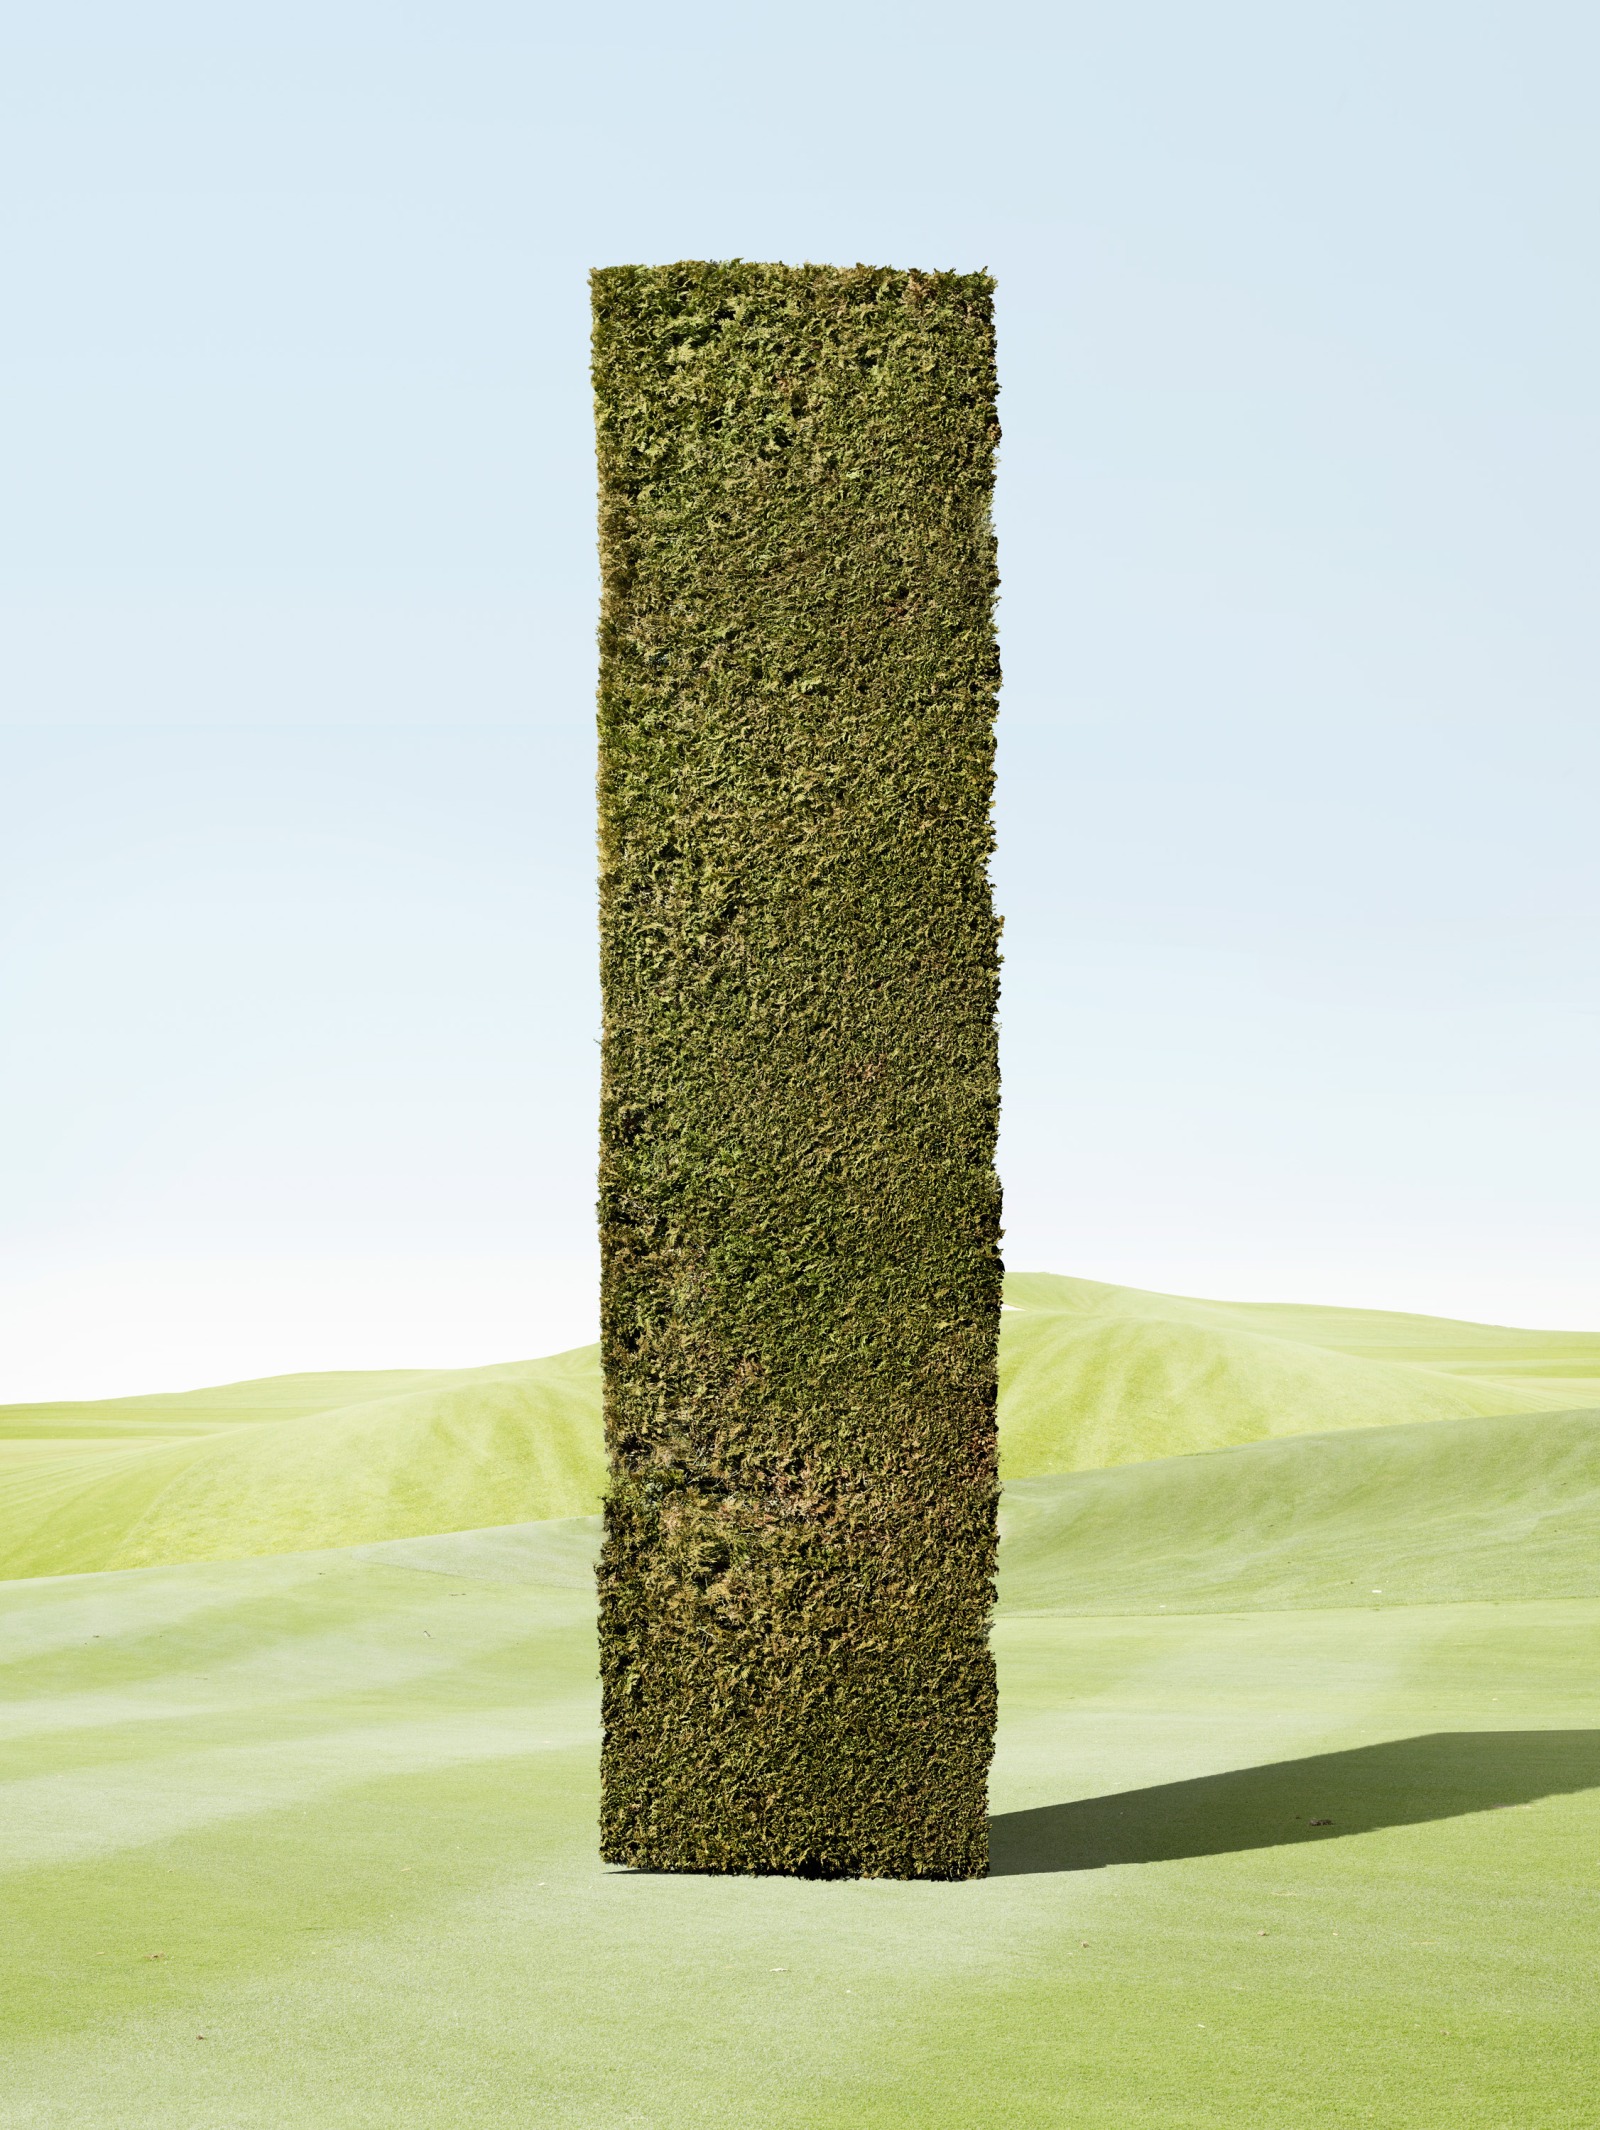 Mystery Monoliths 2 by Clemens ASCHER